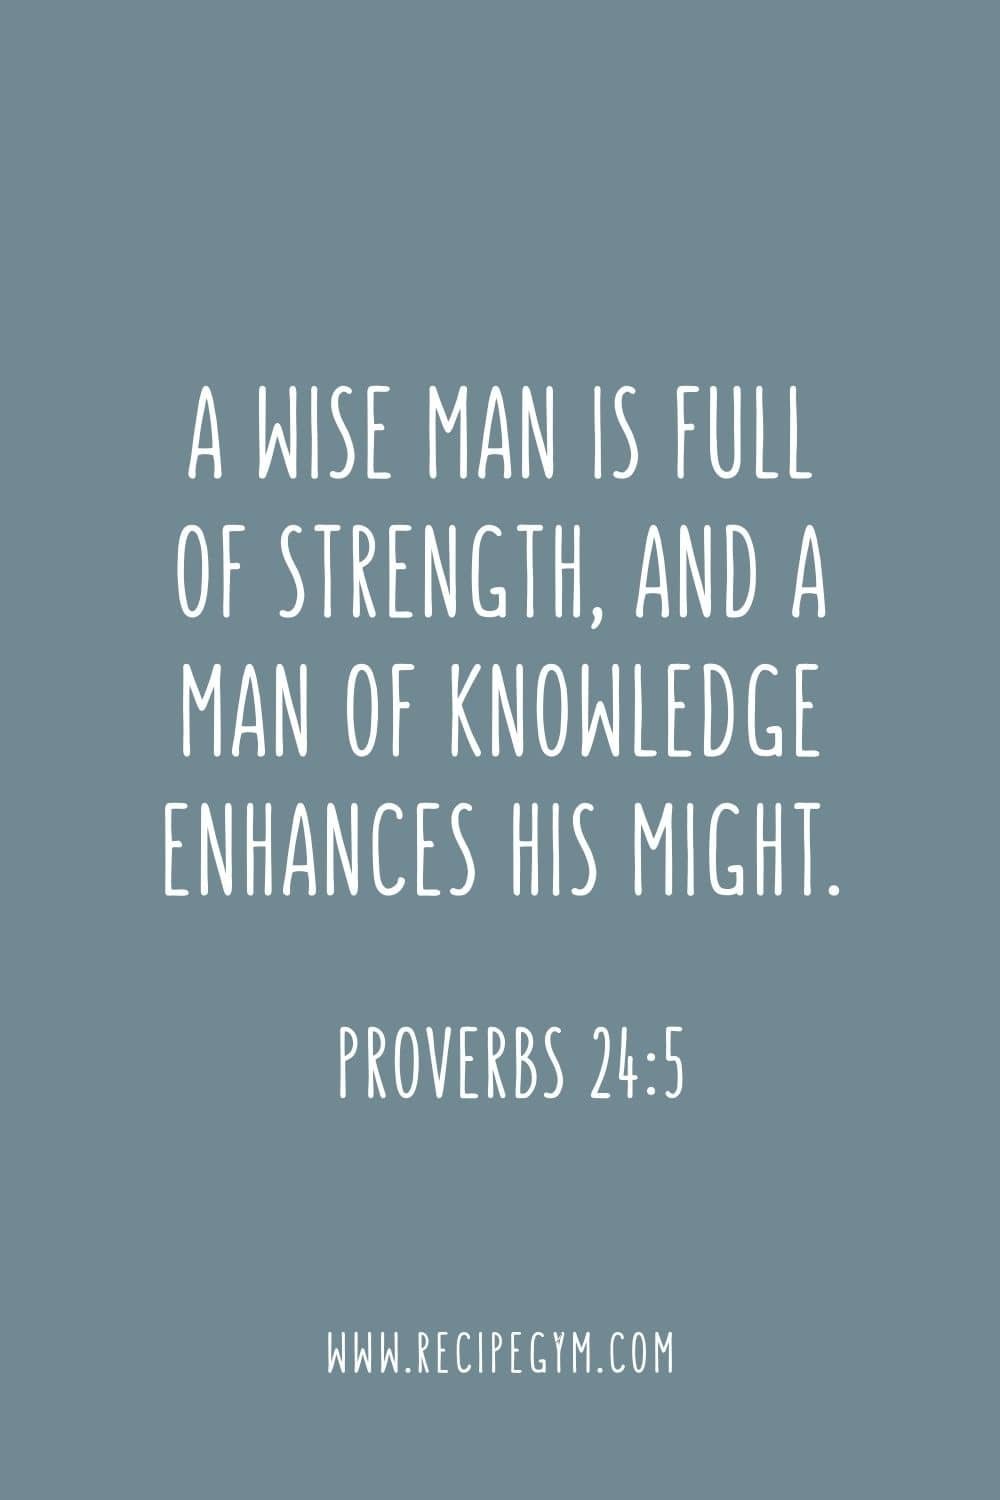 3R A wise man is full of strength and a man of knowledge enhances his might